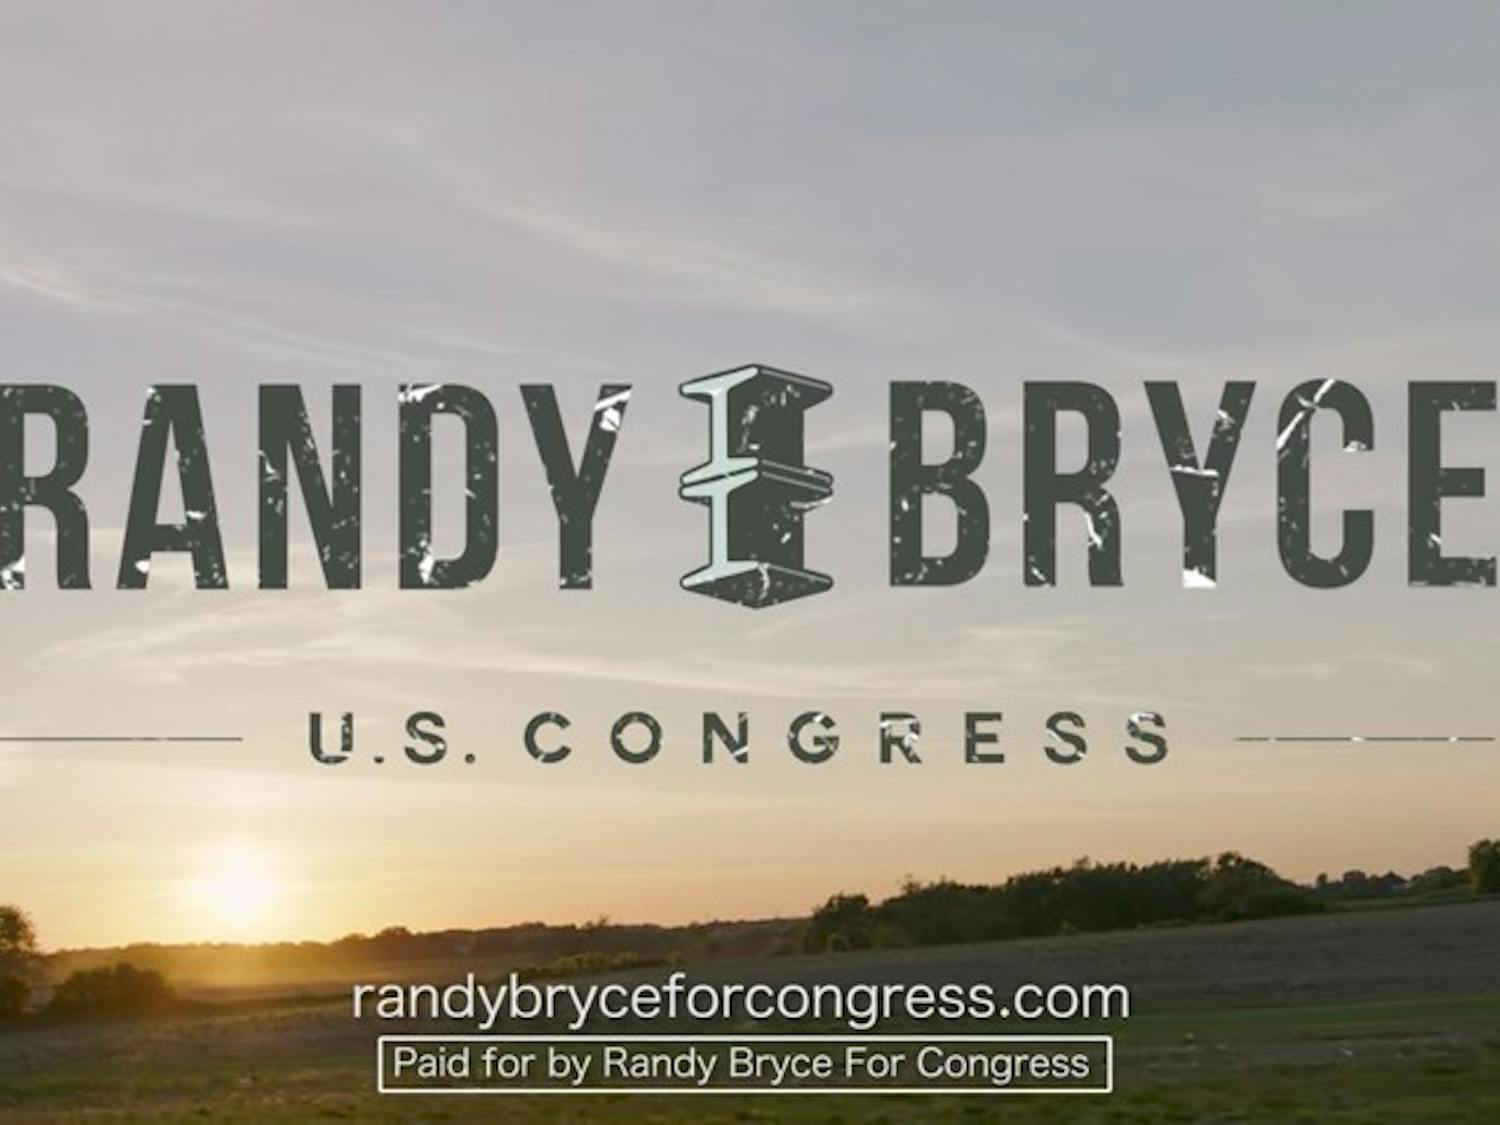 Randy Bryce, a Caledonia ironworker, is trying to use his vast social media presence and progressive message to beat House Speaker Paul Ryan.